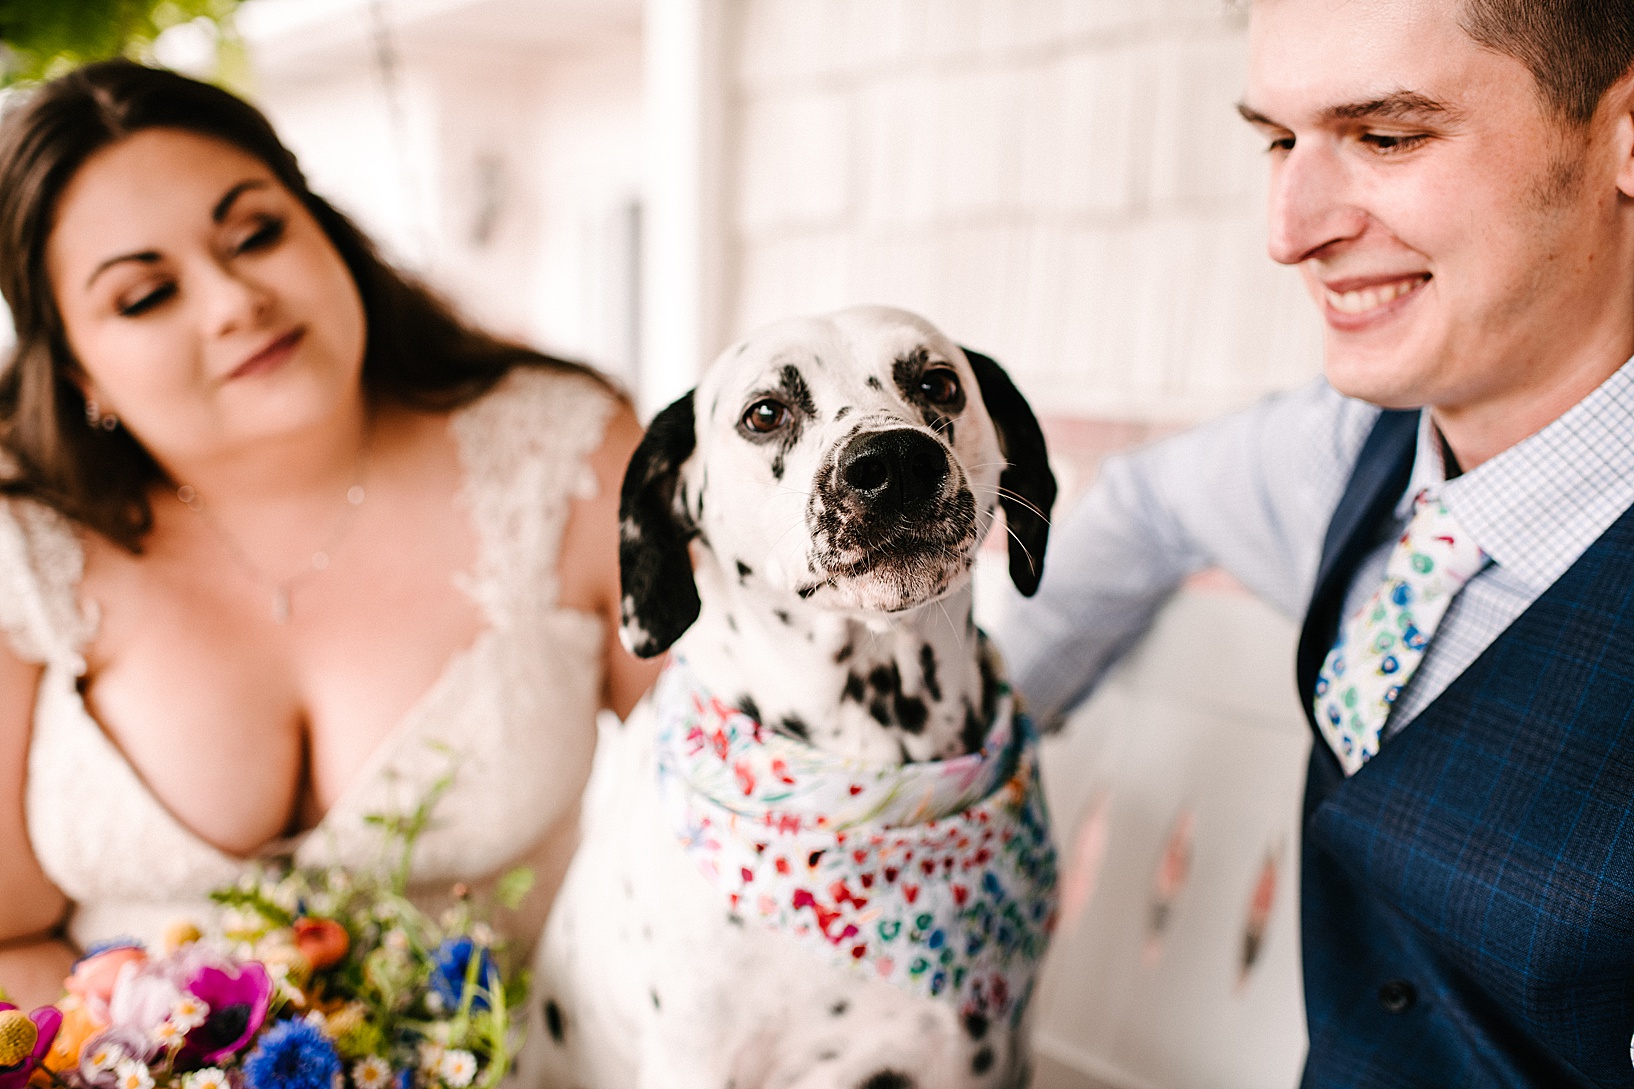 Bride and groom both smiling at their dog on white swing at their new home